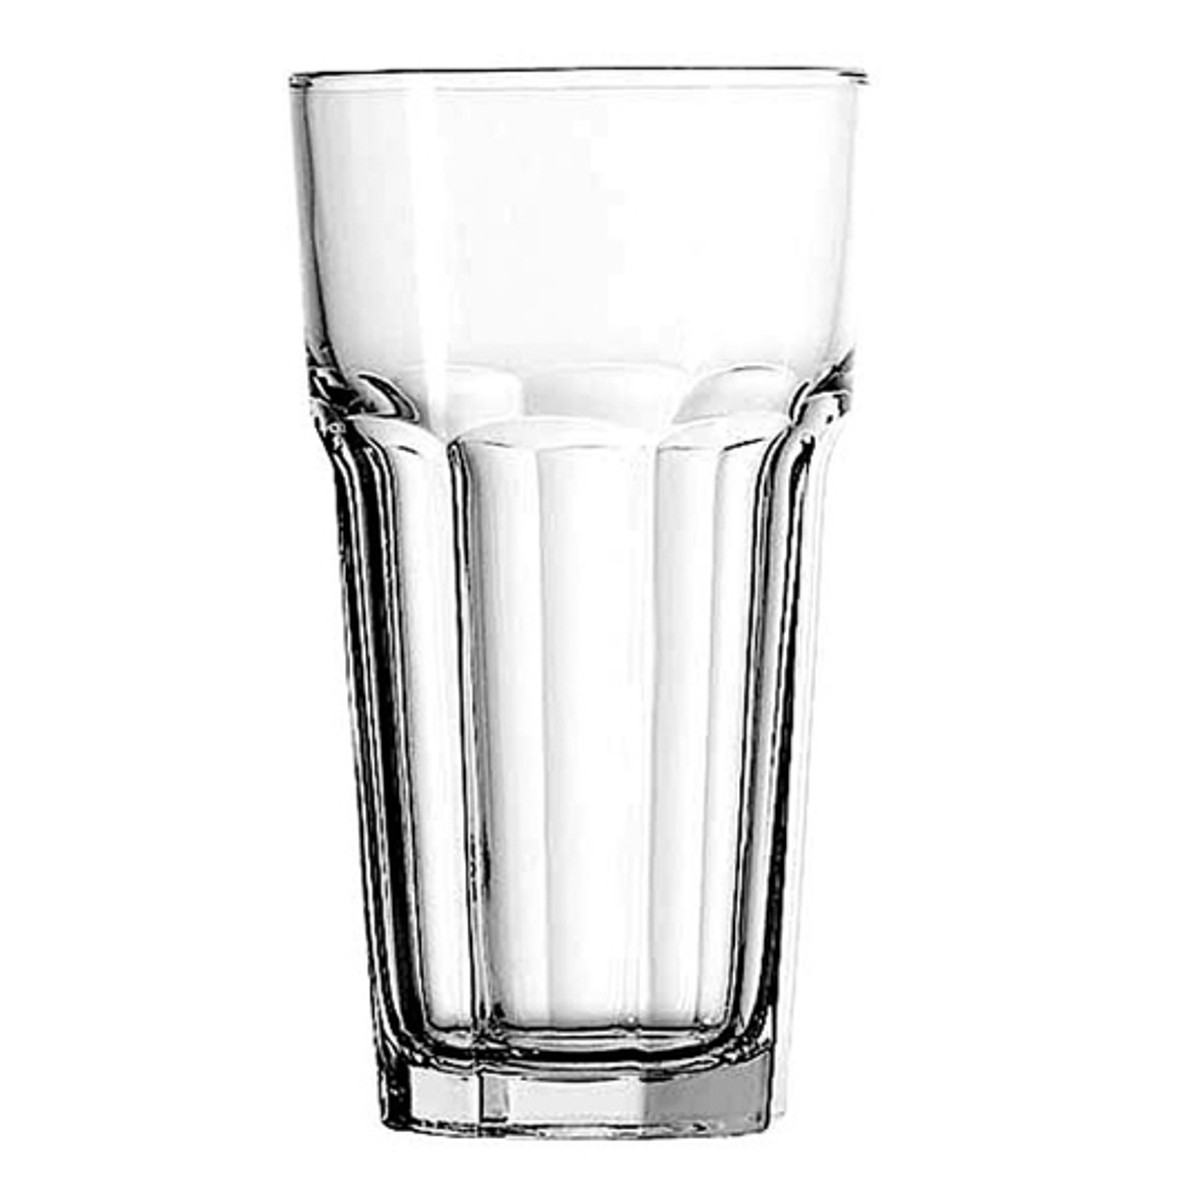 Anchor Hocking 16 Ounce New Orleans Cooler Rim Tempered Glass, 36 per case